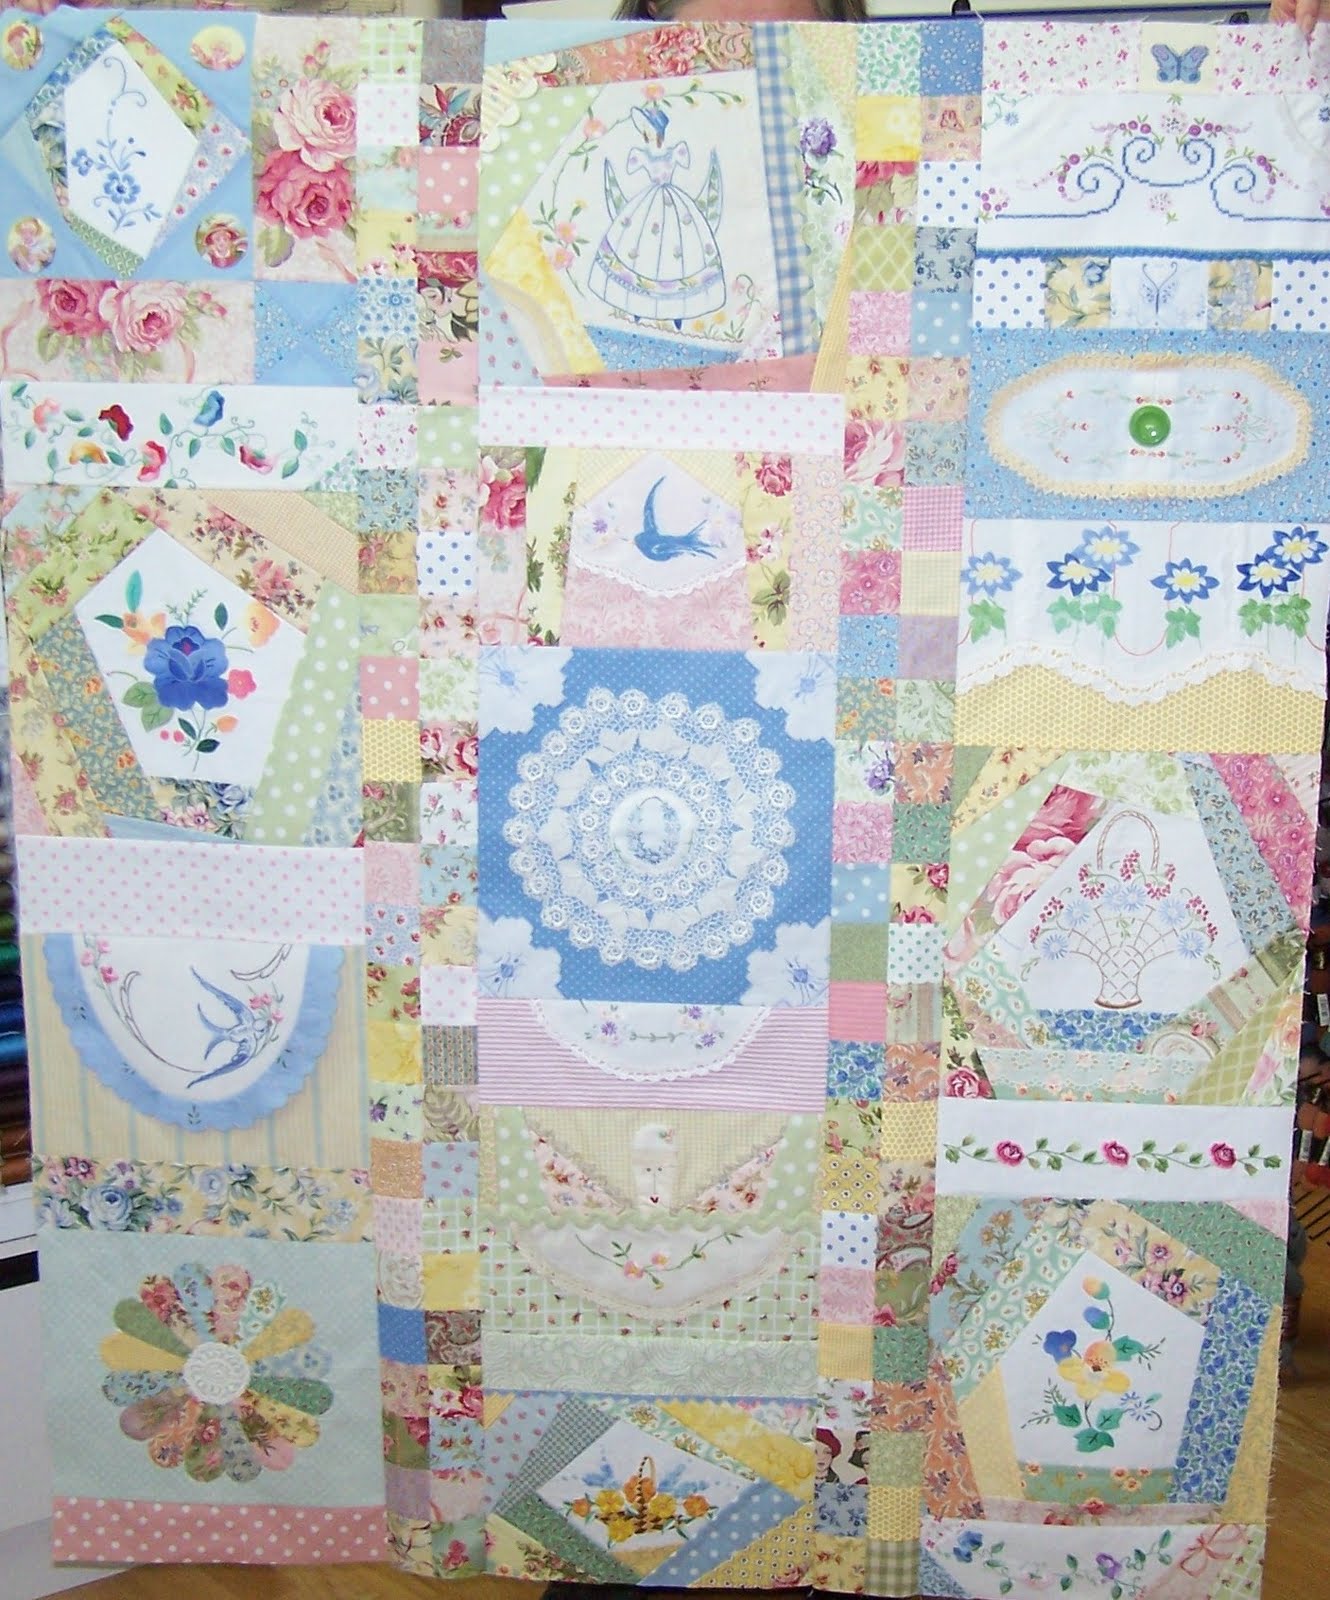 Patchwork Fundamentals: Never too old to learn